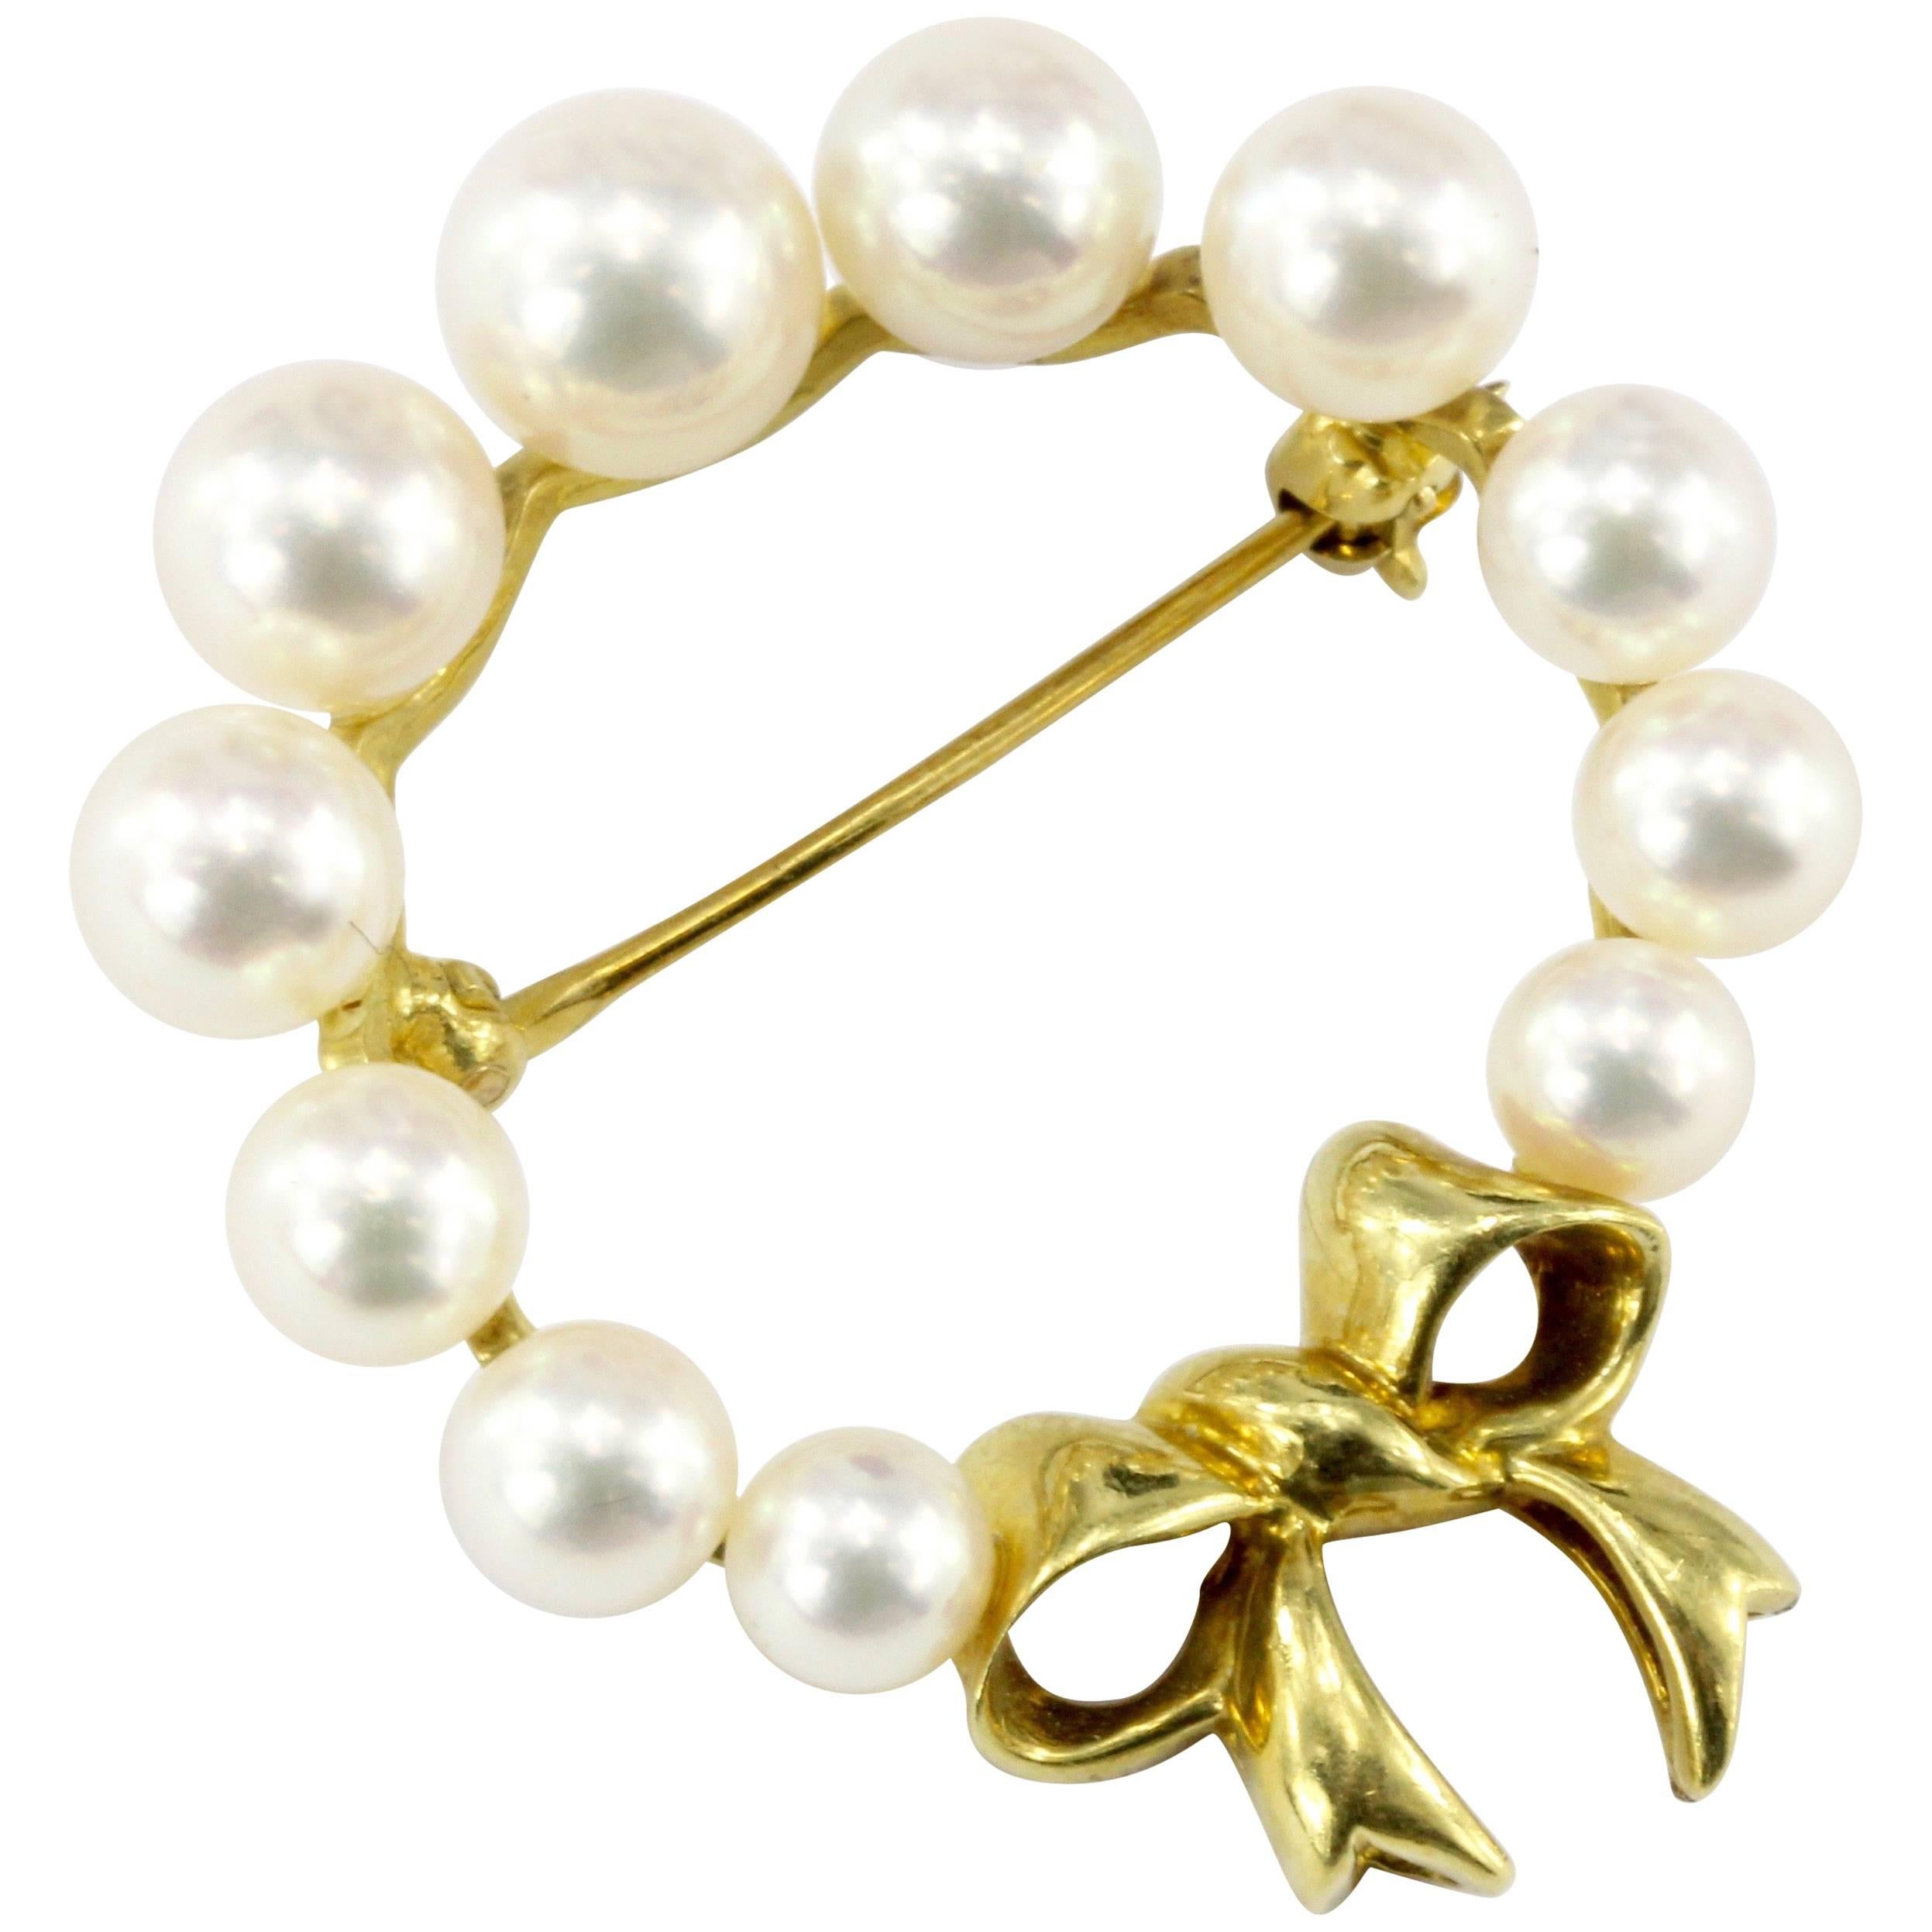 Tiffany & Co. 18 Karat Yellow Gold and Pearl Wreath with Bow Brooch Pin